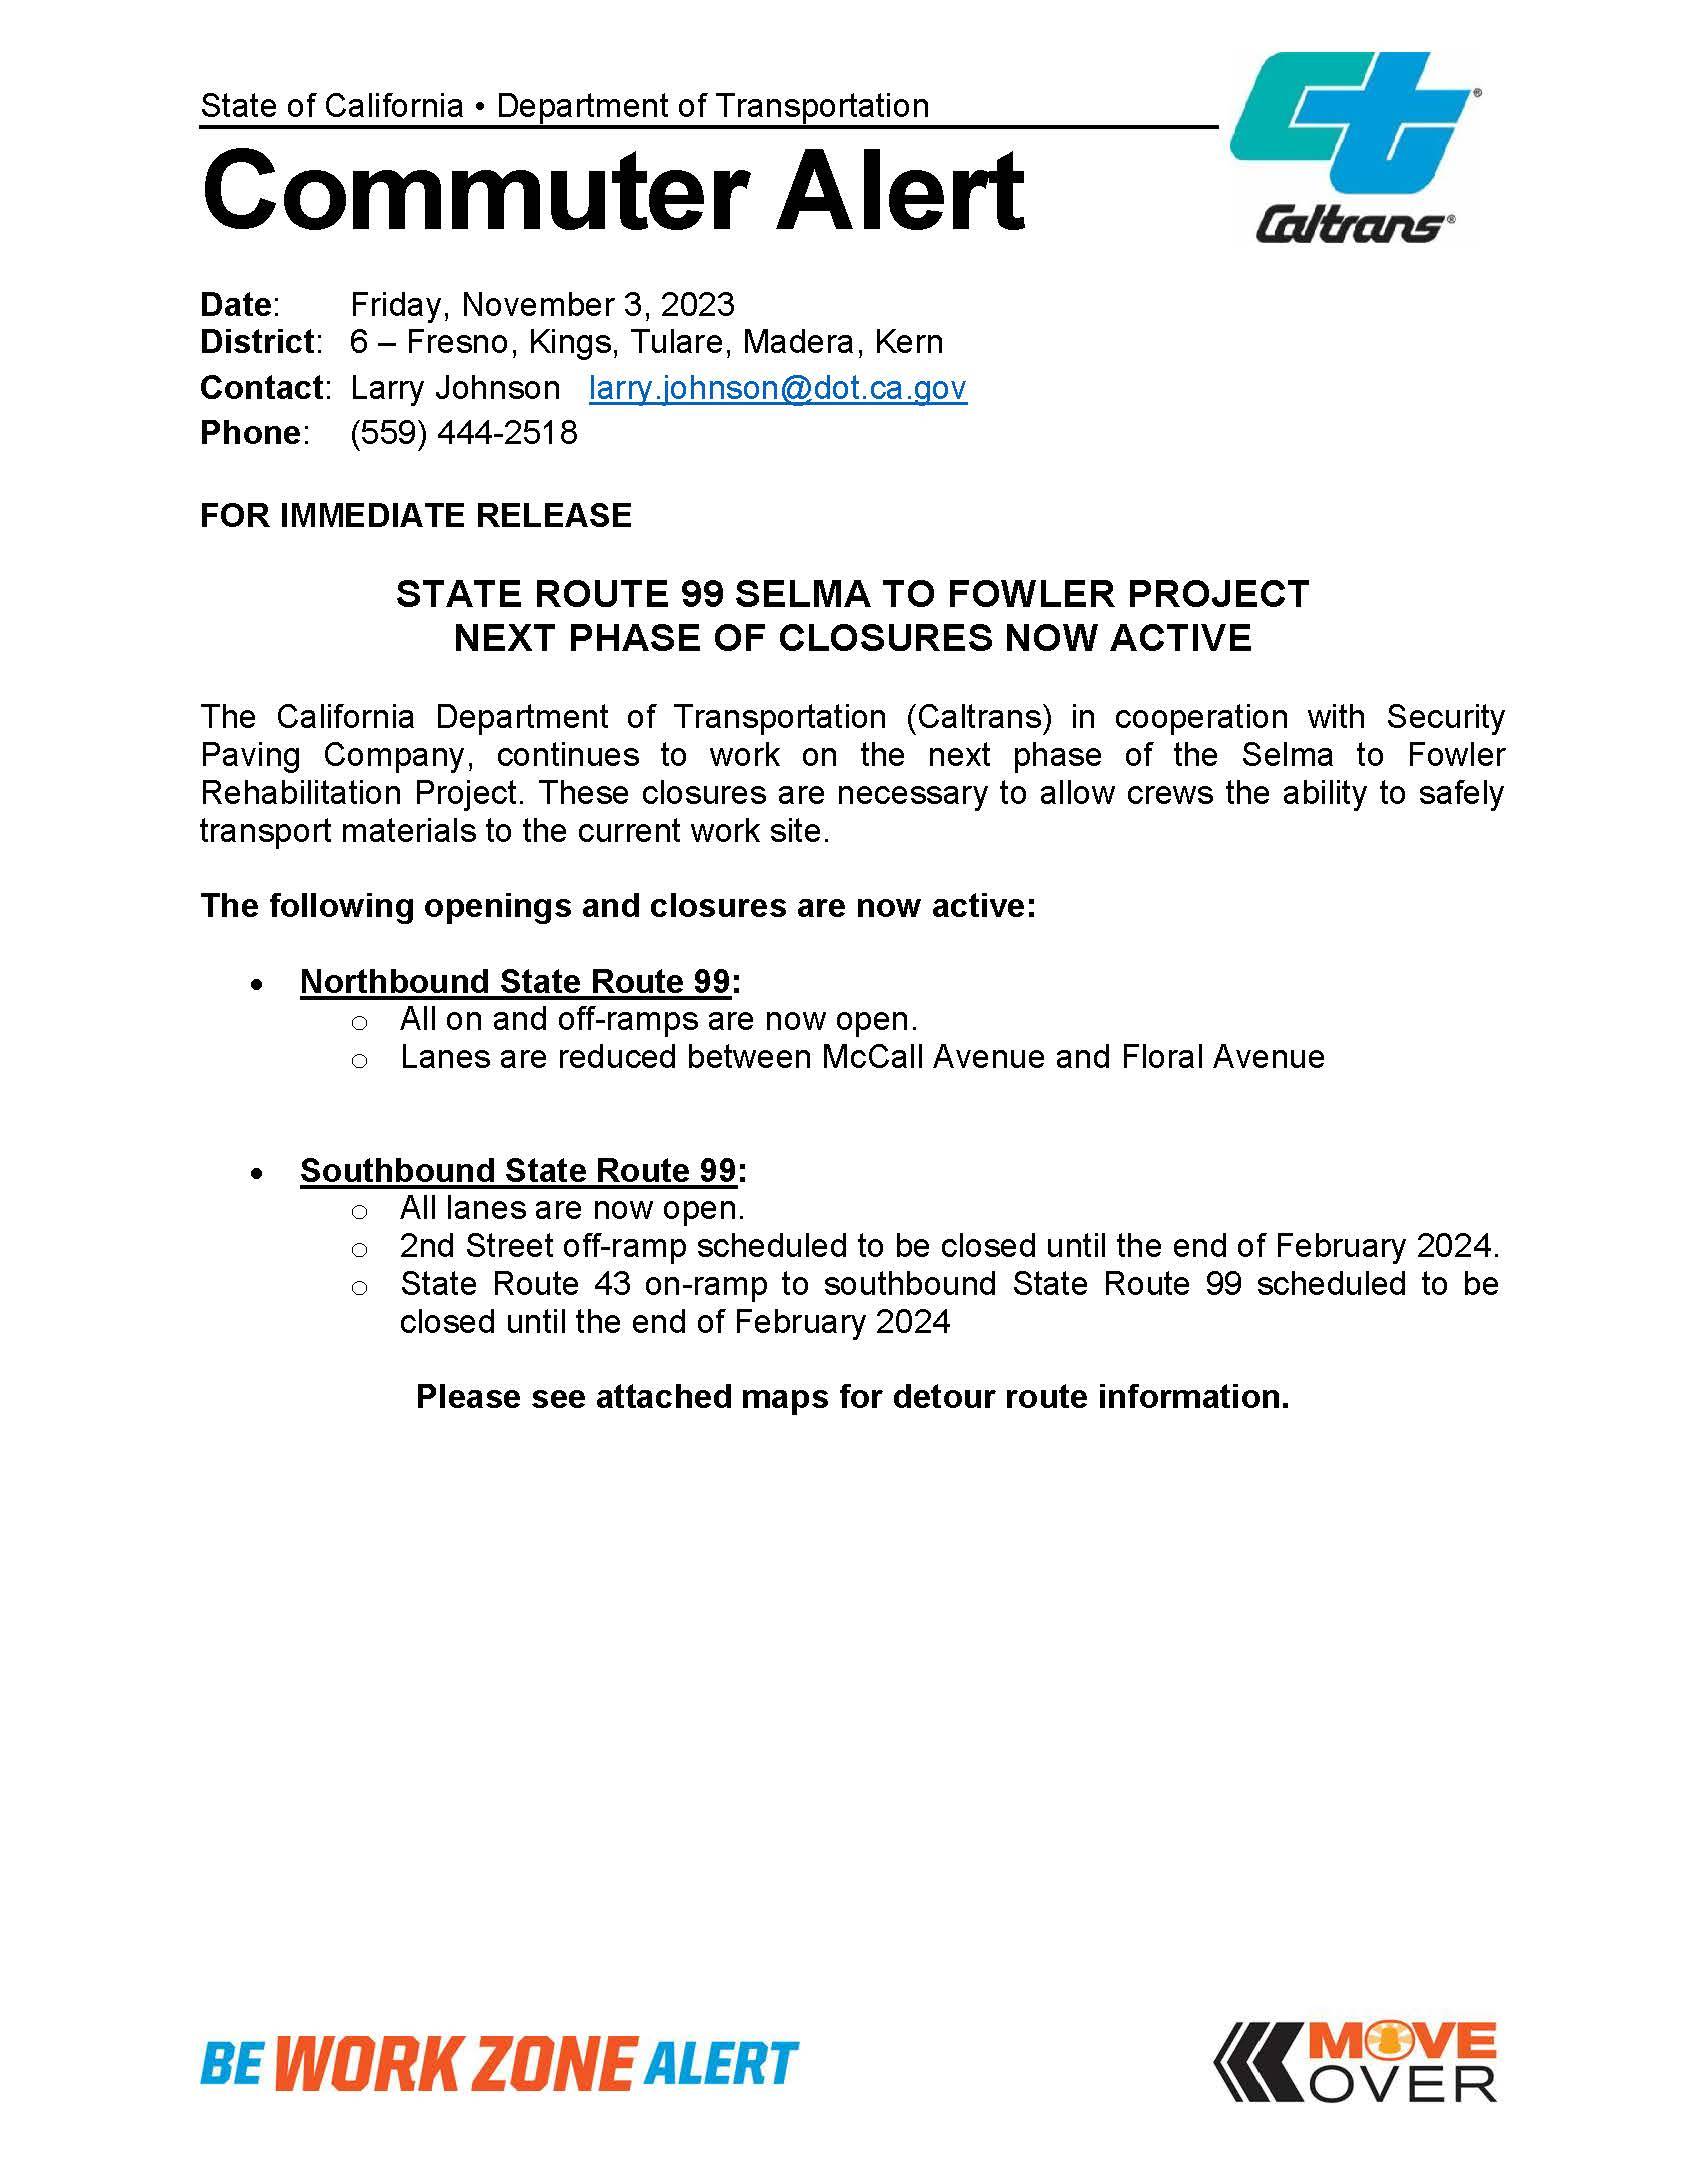 Selma to Fowler Rehab Commuter Alert Closures In Place 11.3.23_Page_1 - Copy